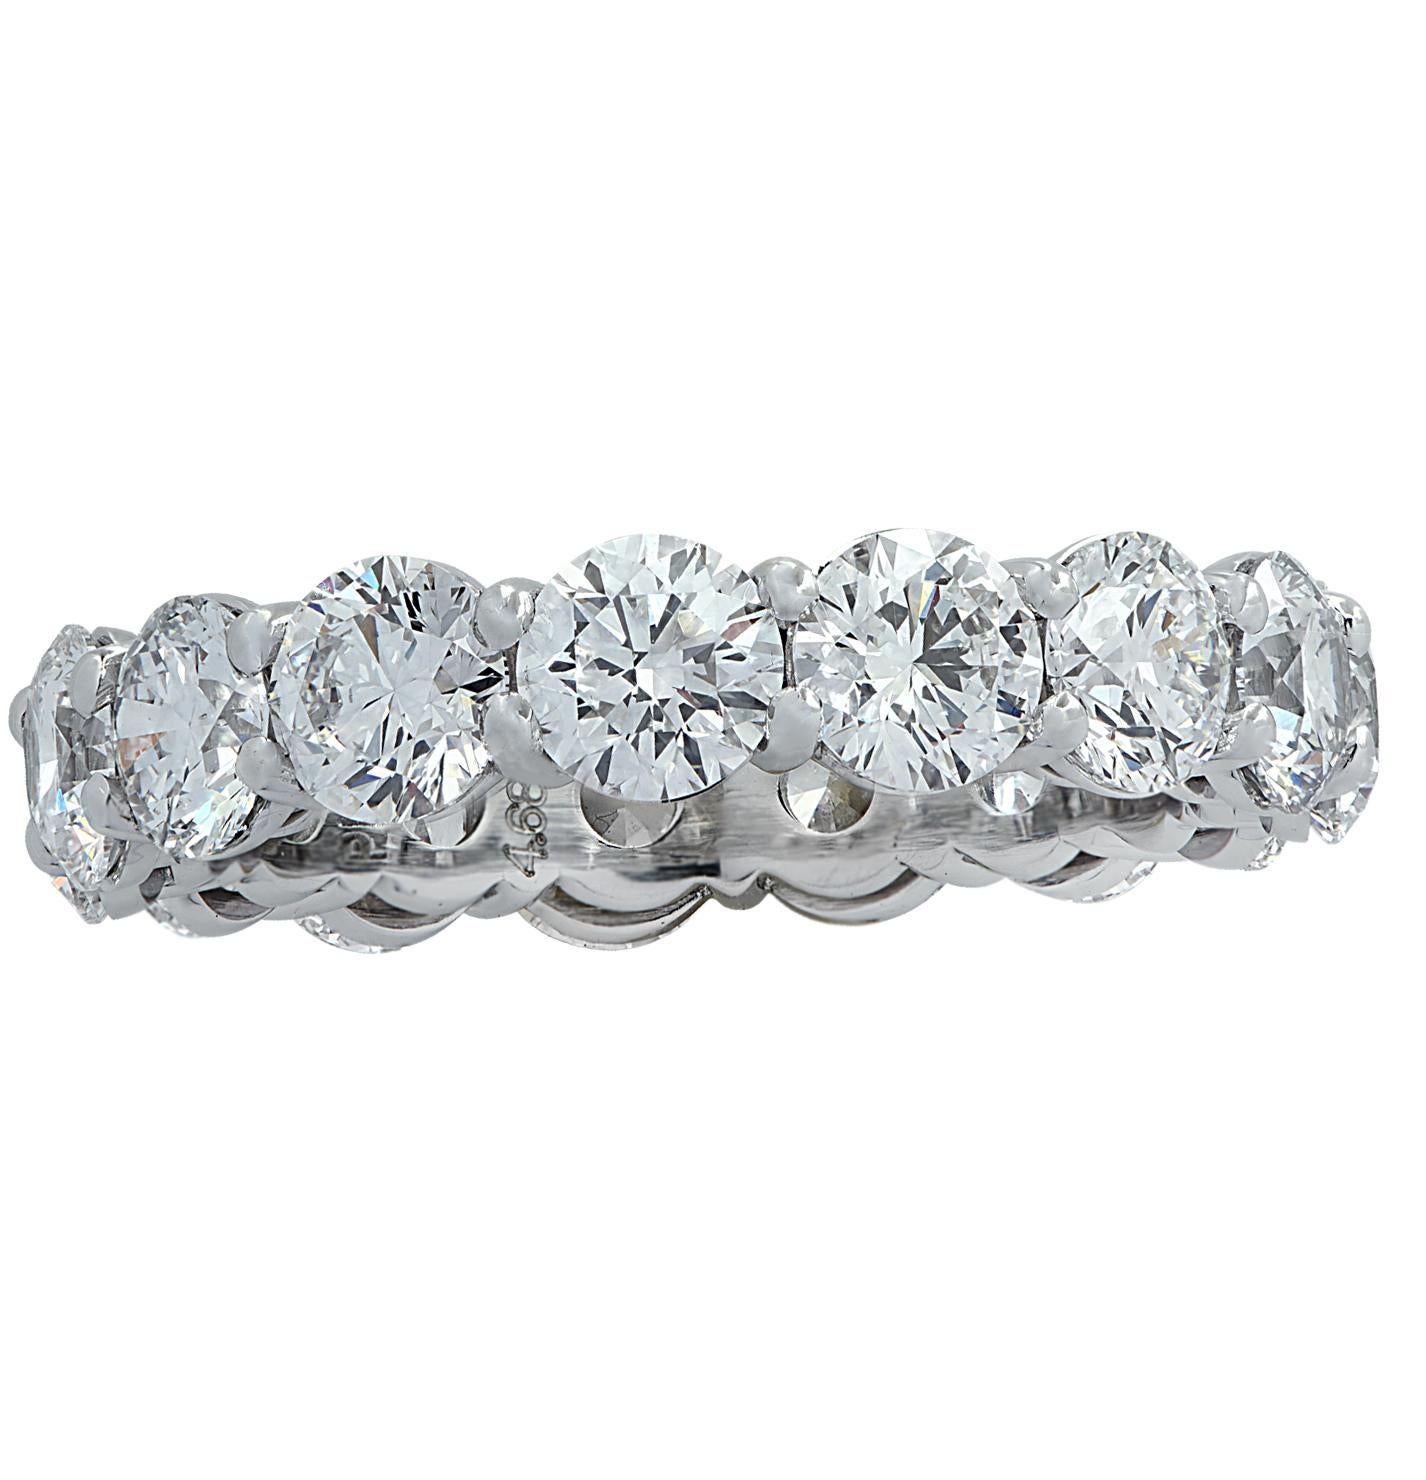 Exquisite Vivid Diamonds eternity band crafted in Platinum, showcasing 16 stunning round brilliant cut diamonds weighing 4.04 carats total, F color, VS-SI clarity. Each diamond was carefully selected, perfectly matched and set in a seamless sea of